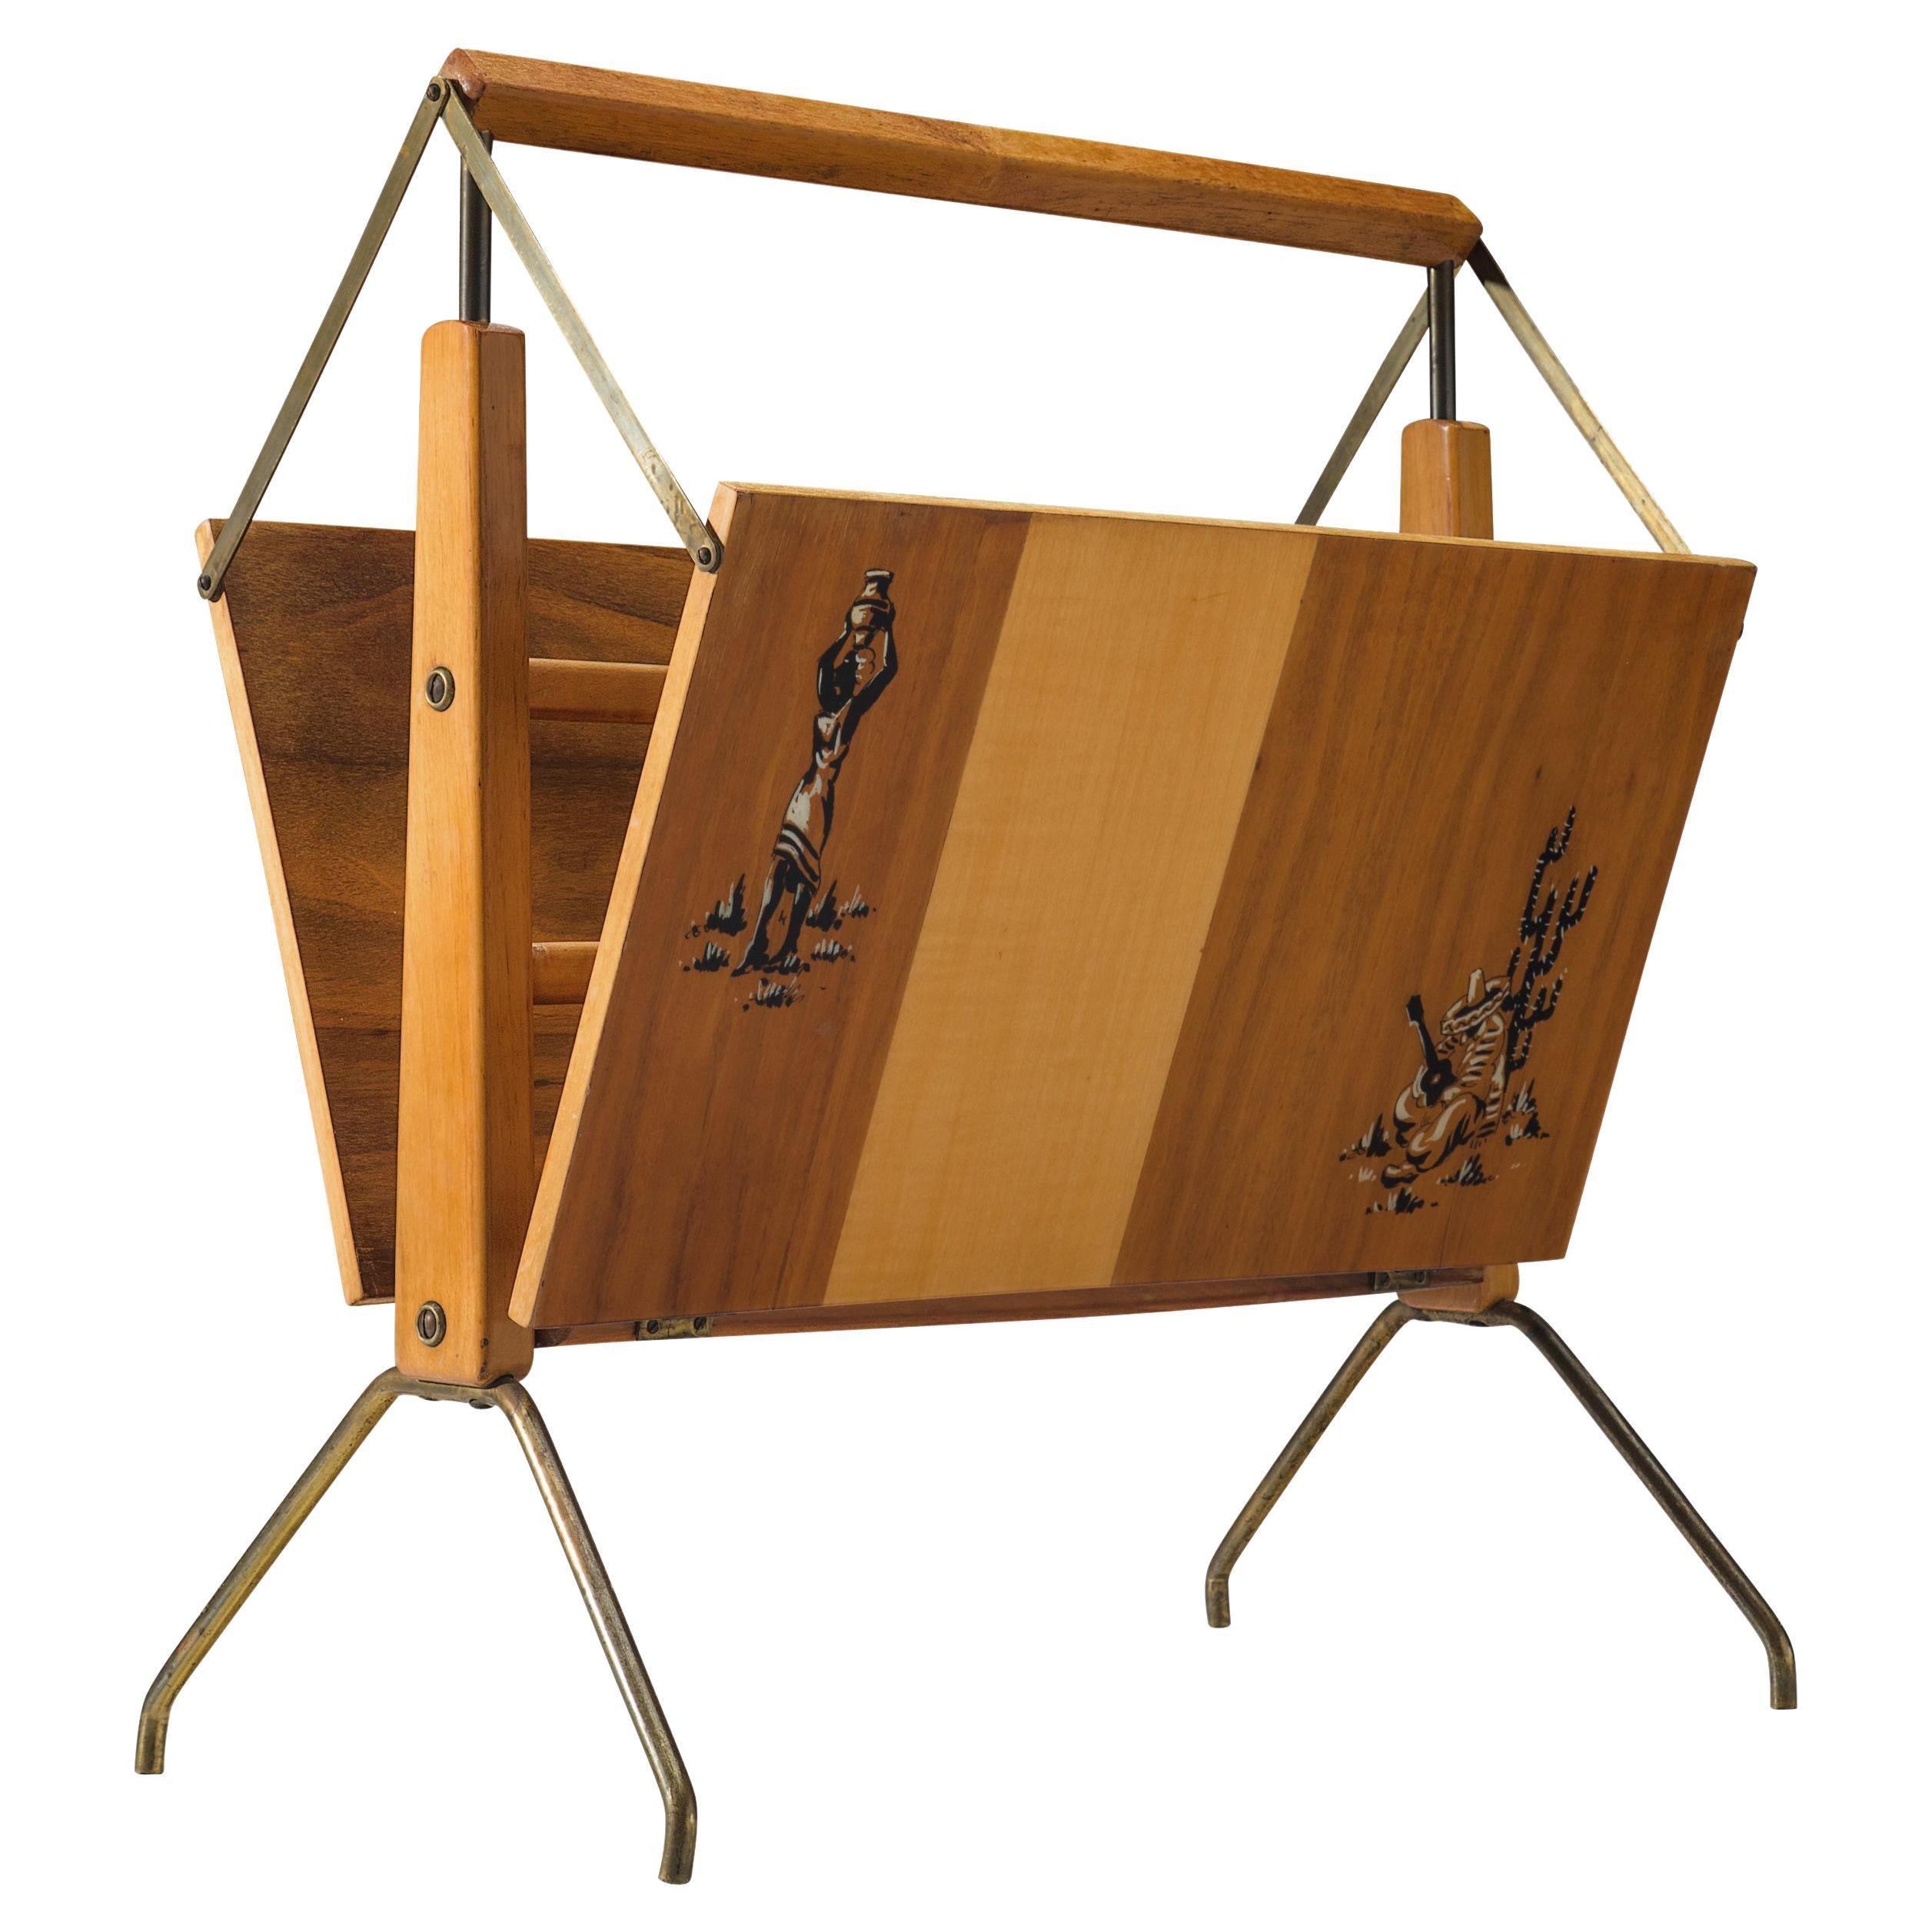 Italian Foldable Magazine Rack in Walnut and Brass with Illustrations 